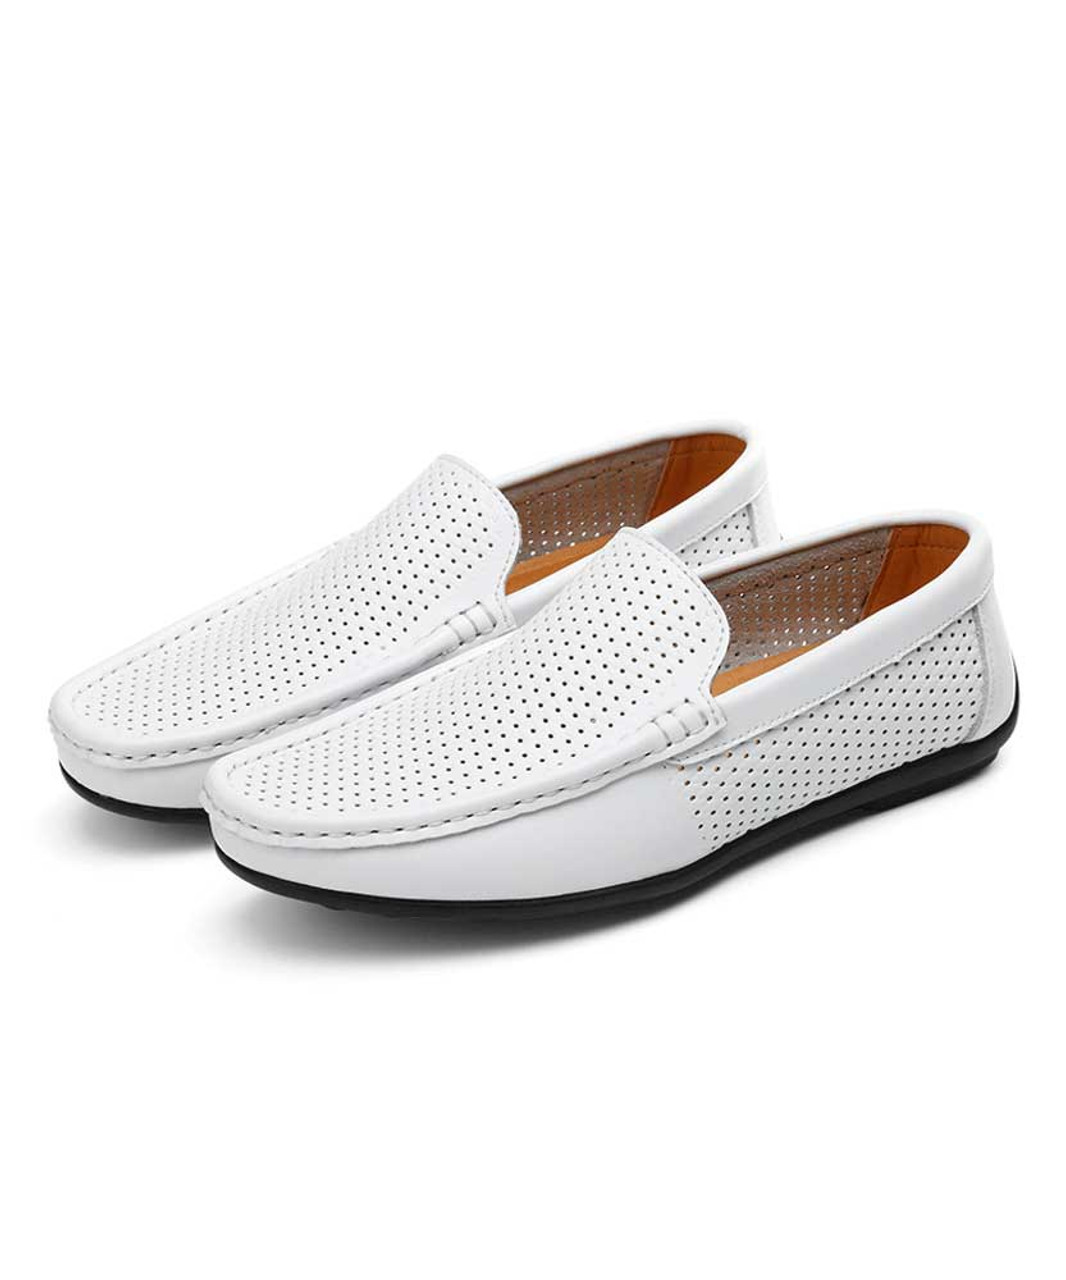 White hollow out leather slip on shoe loafer | Mens shoe loafers online ...